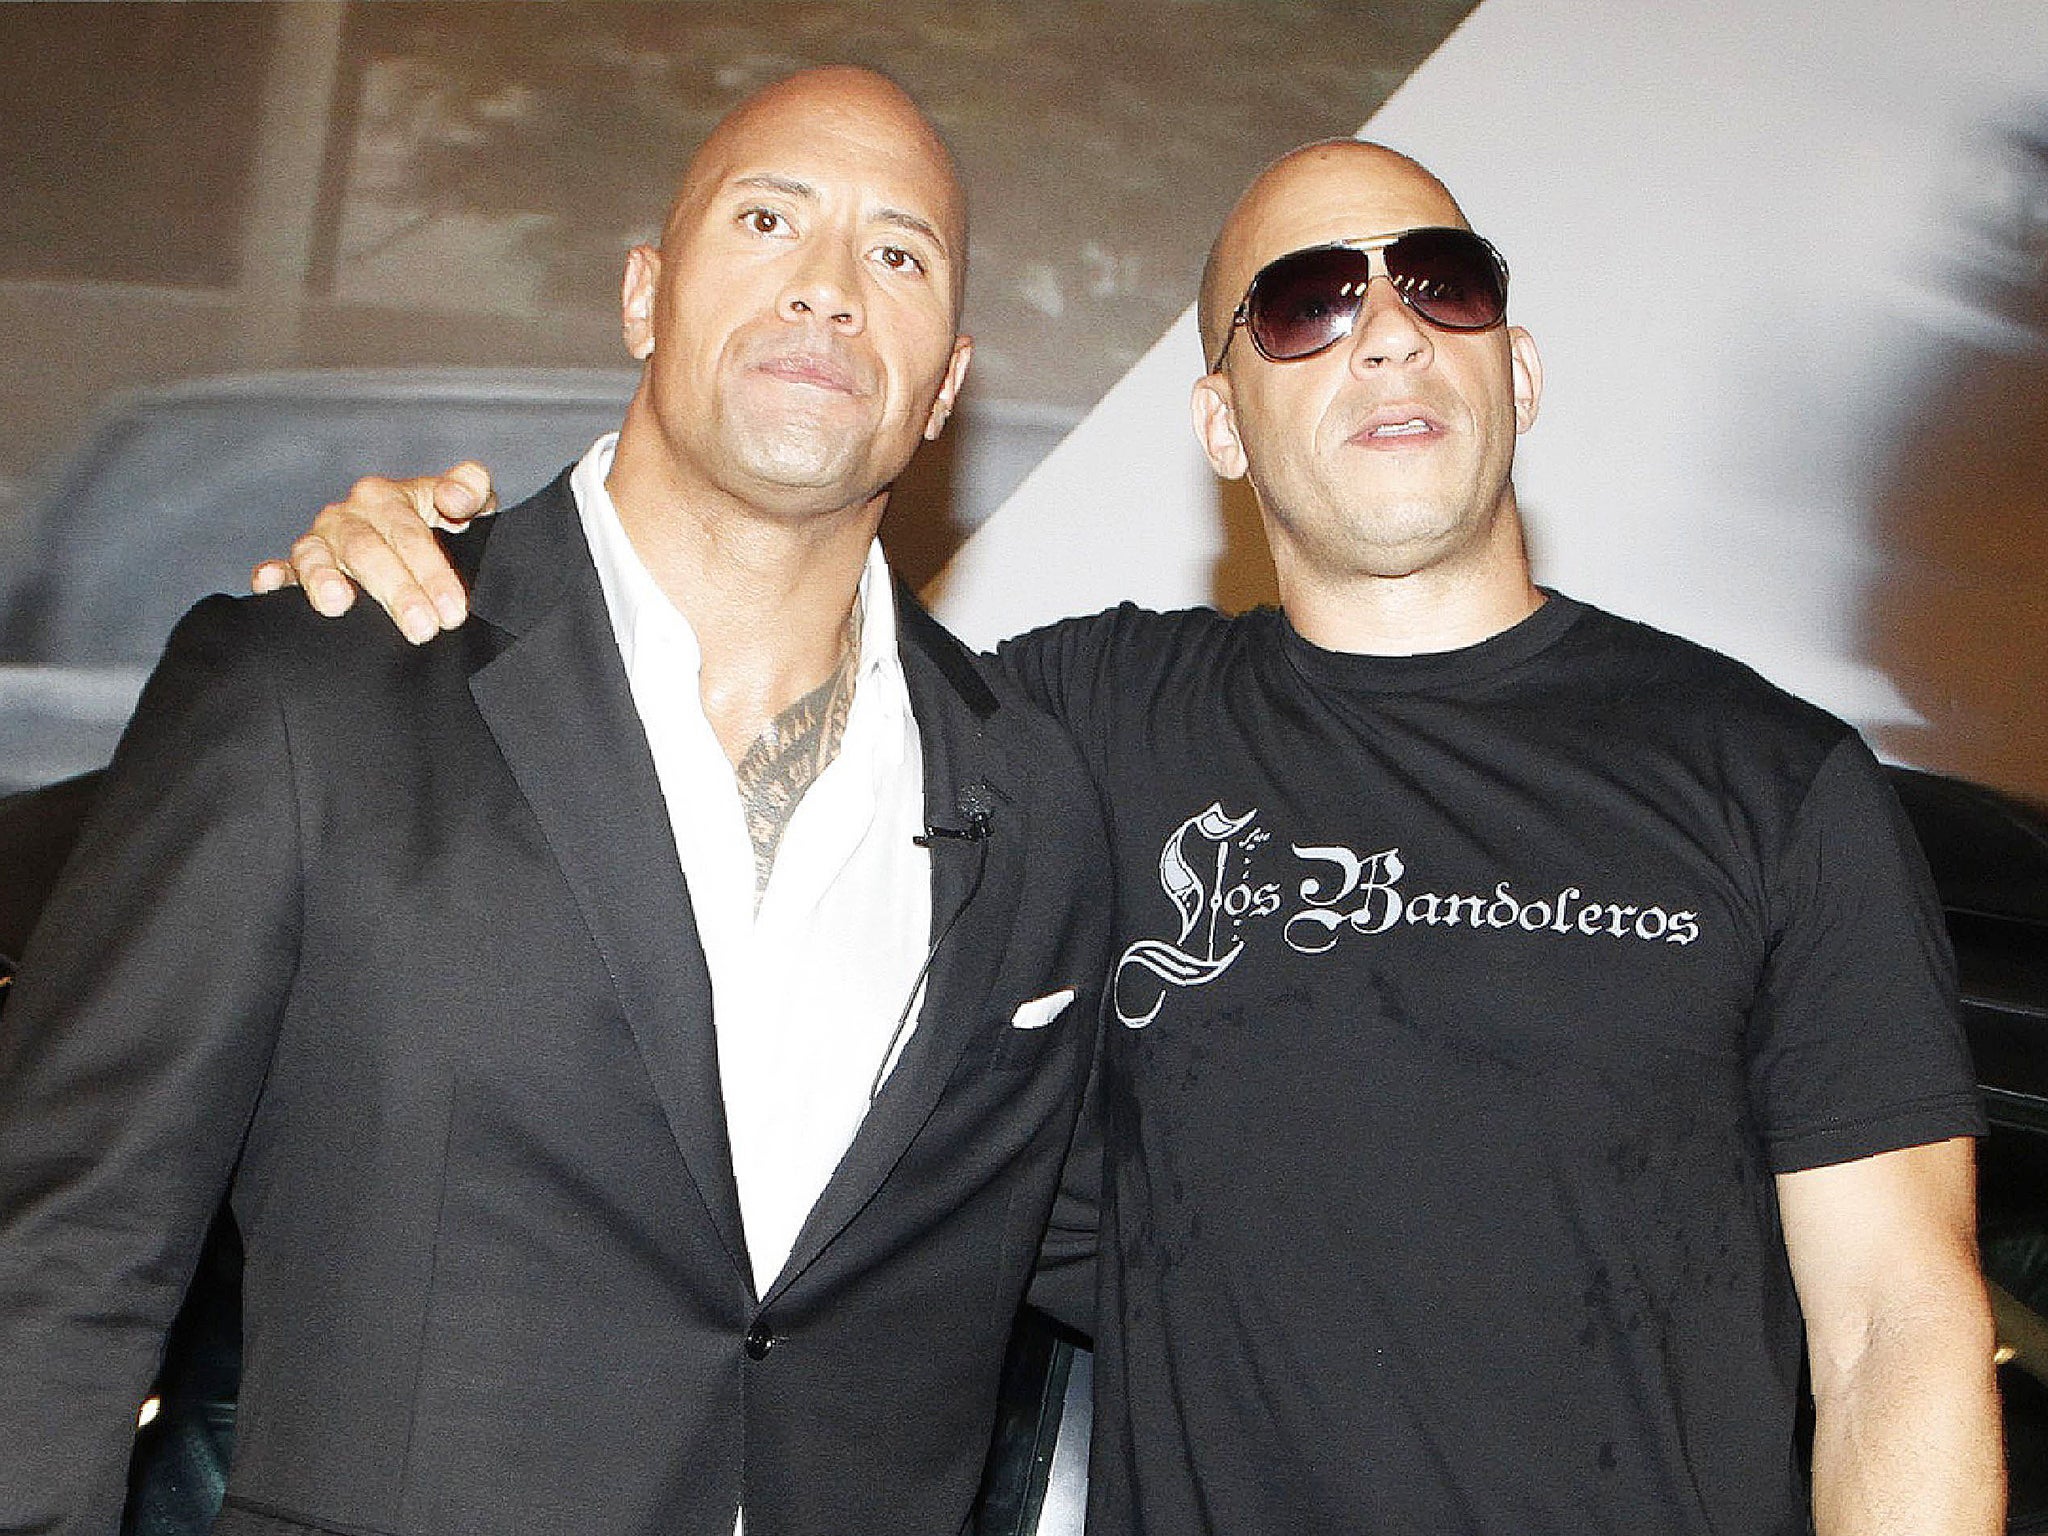 Dwayne Johnson and Vin Diesel at a ‘Fast Five’ premiere in 2011